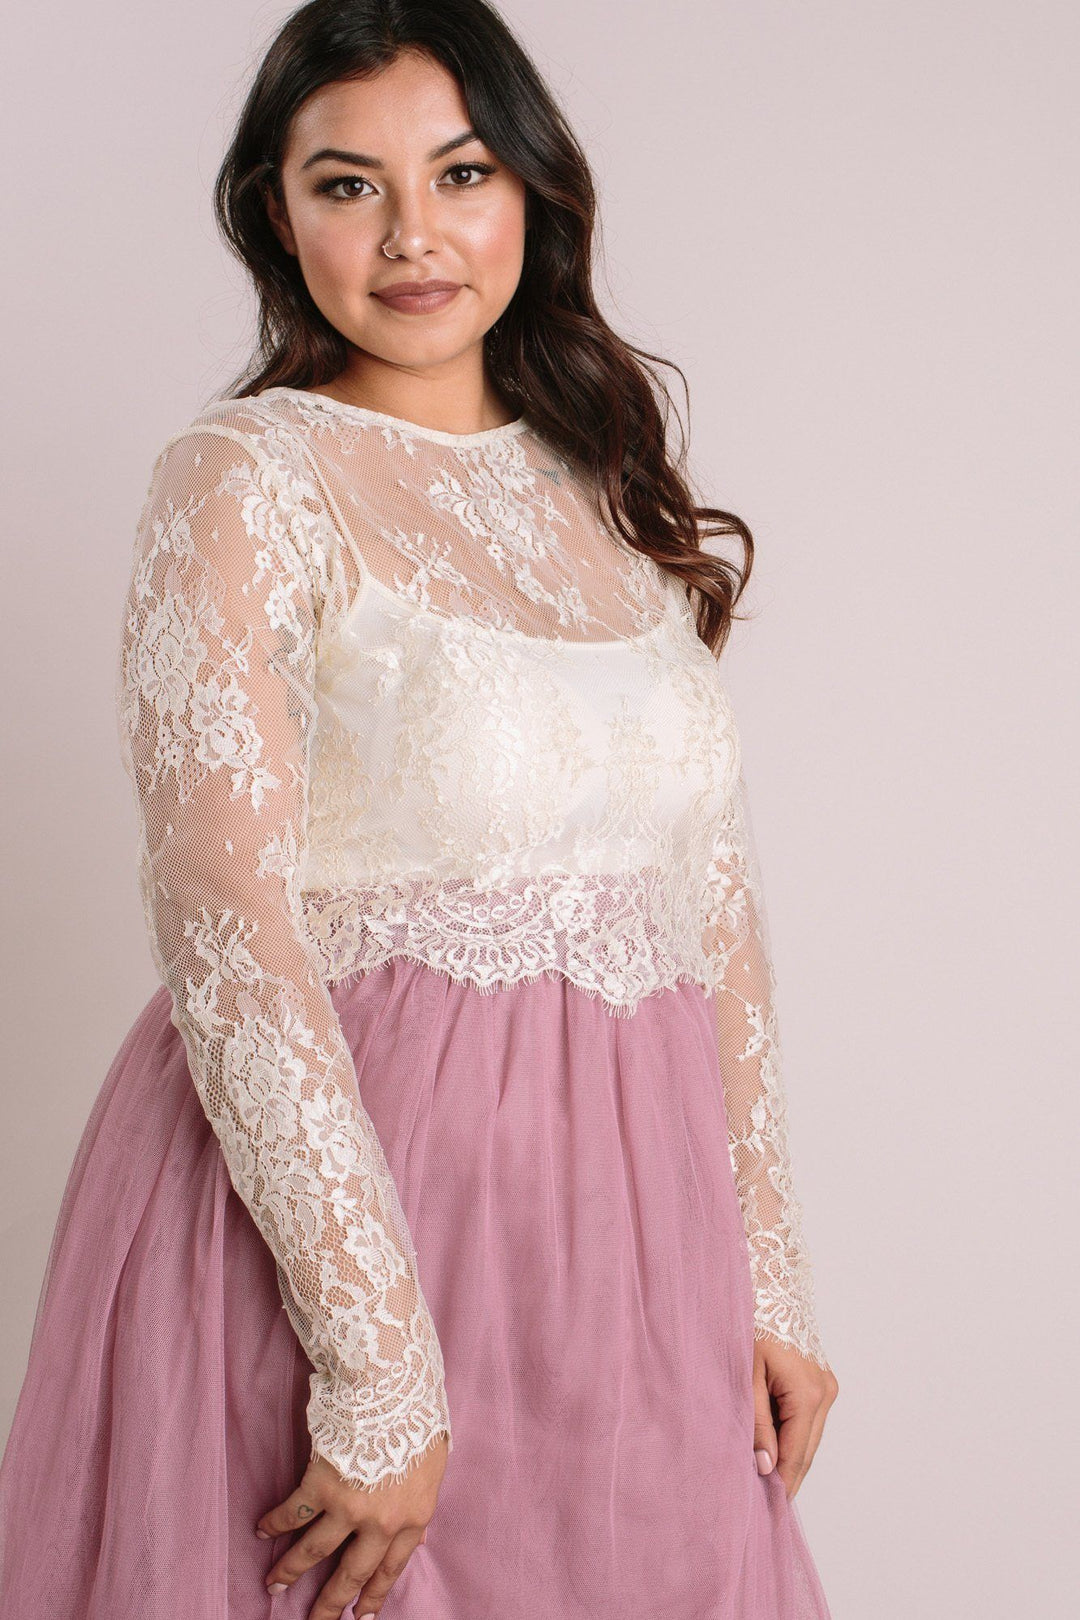 Lace Crop Top with Long Sleeves - Amelia - Morning Lavender Online Boutique